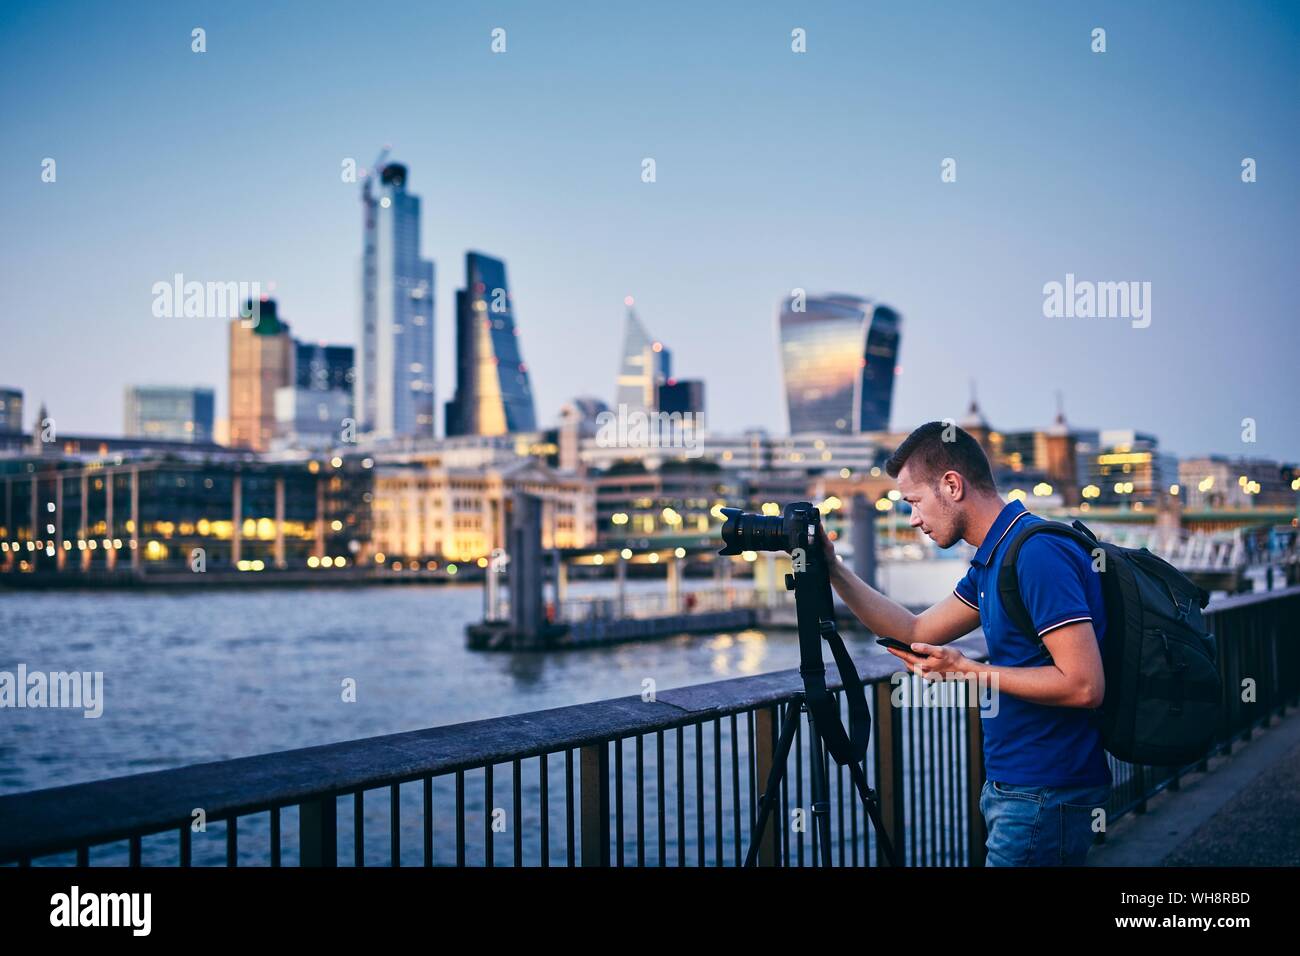 Young man photographing with tripod on embankment against urban skyline. Photographer holding smart phone with app. City life in London, United Kingdo Stock Photo